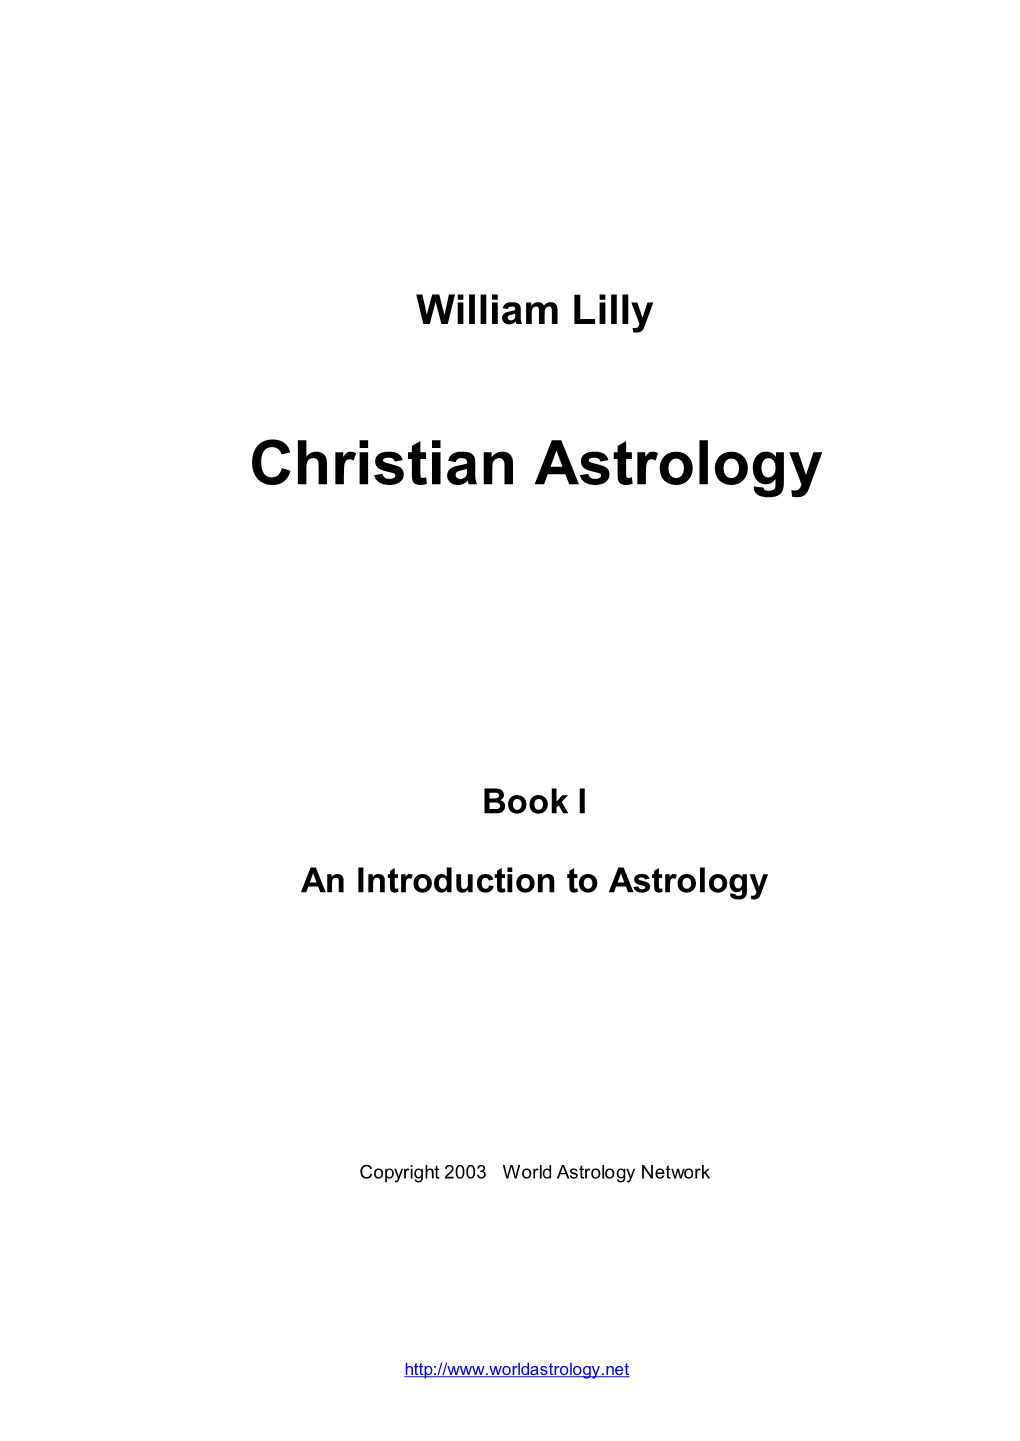 William Lilly Christian Astrology I